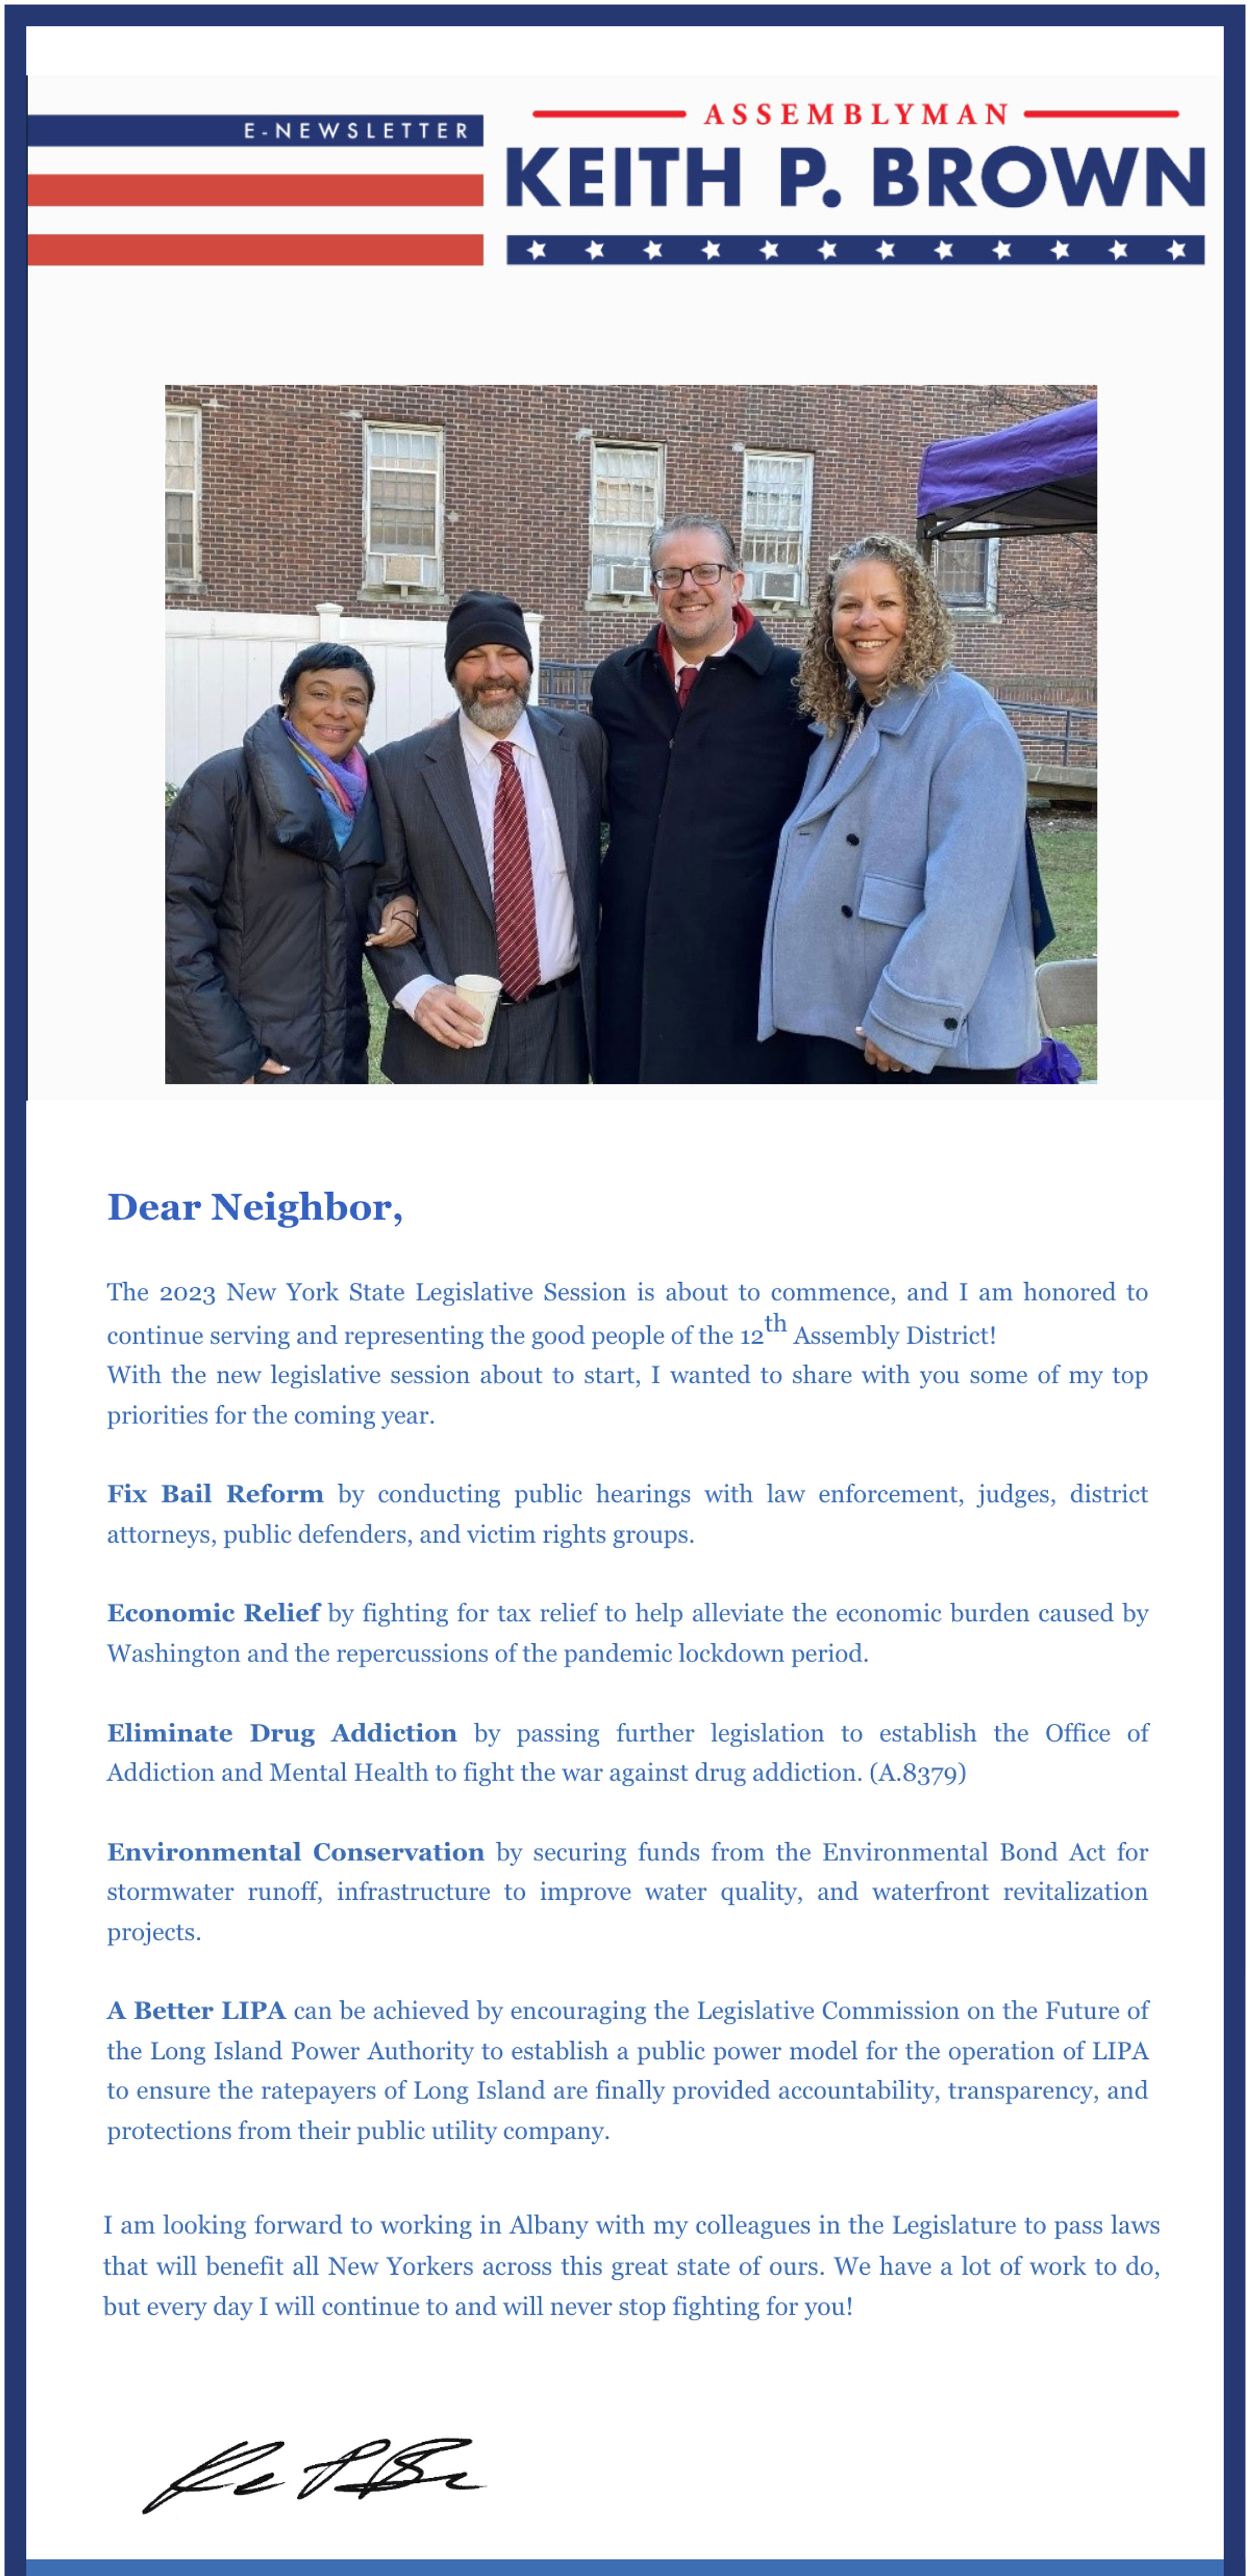 Assemblyman Keith Brown’s Winter 2022 Newsletter